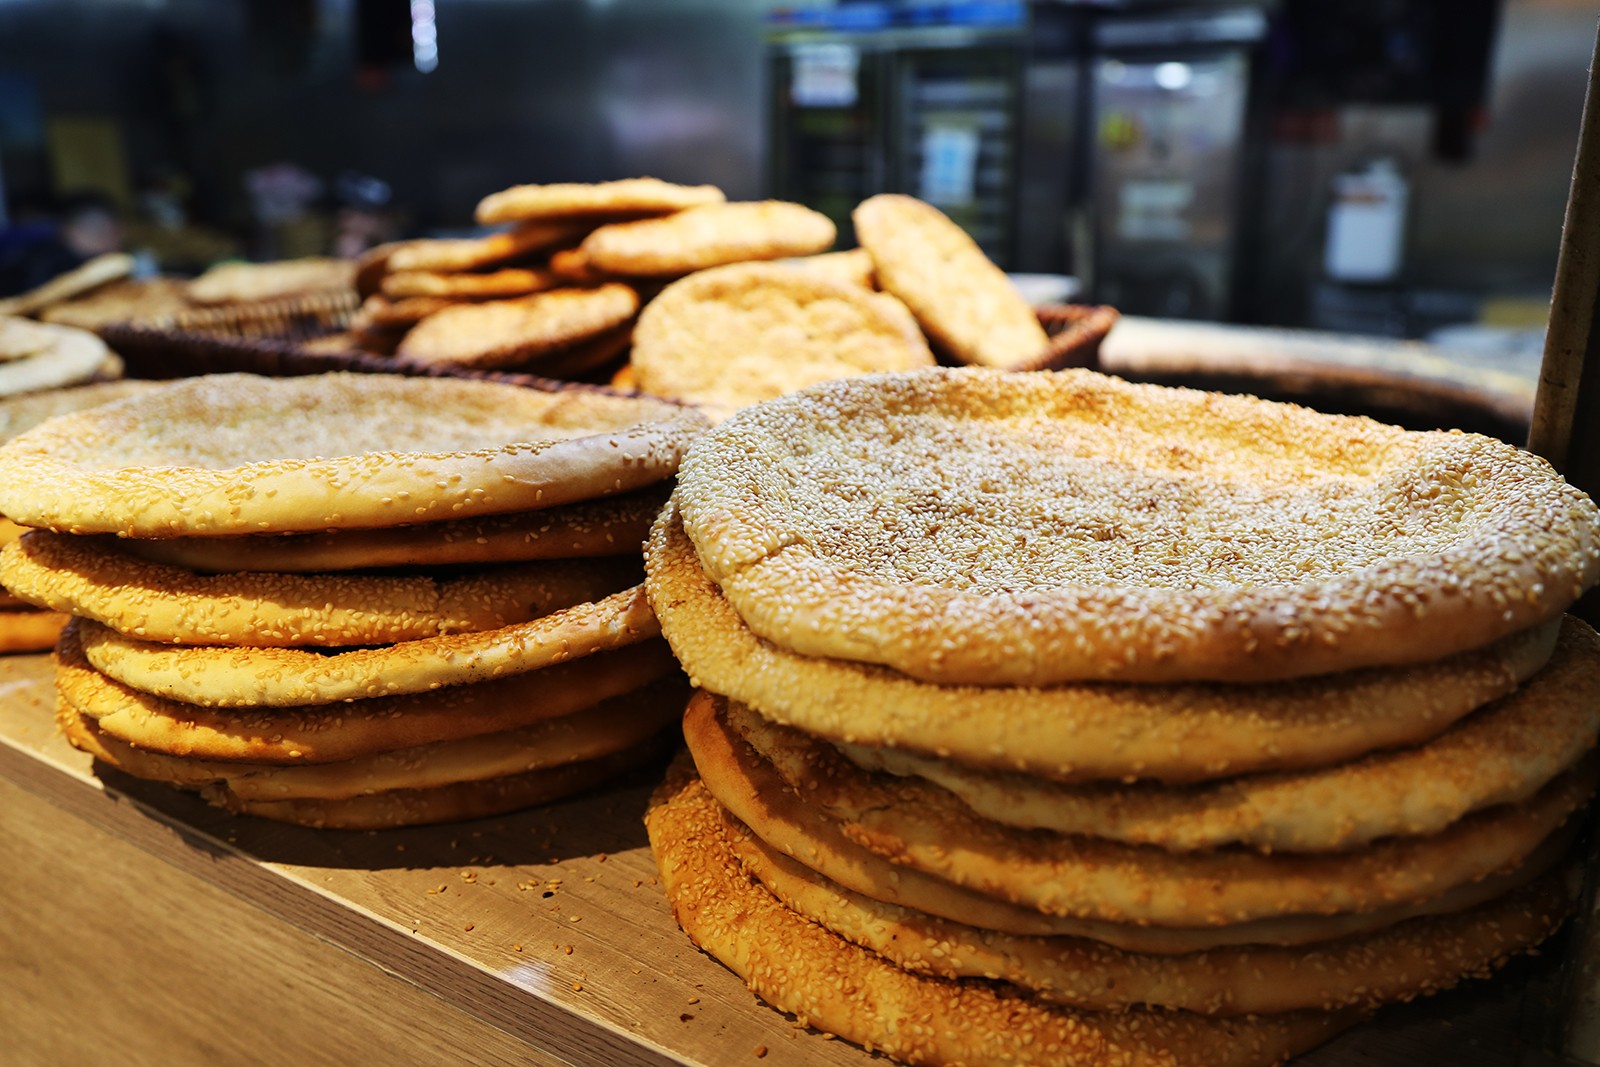 Piles of nang, a kind of staple roasted flatbread from Xinjiang, are displayed for sale in a store at the Xinjiang International Grand Bazaar in Urumqi. /CGTN